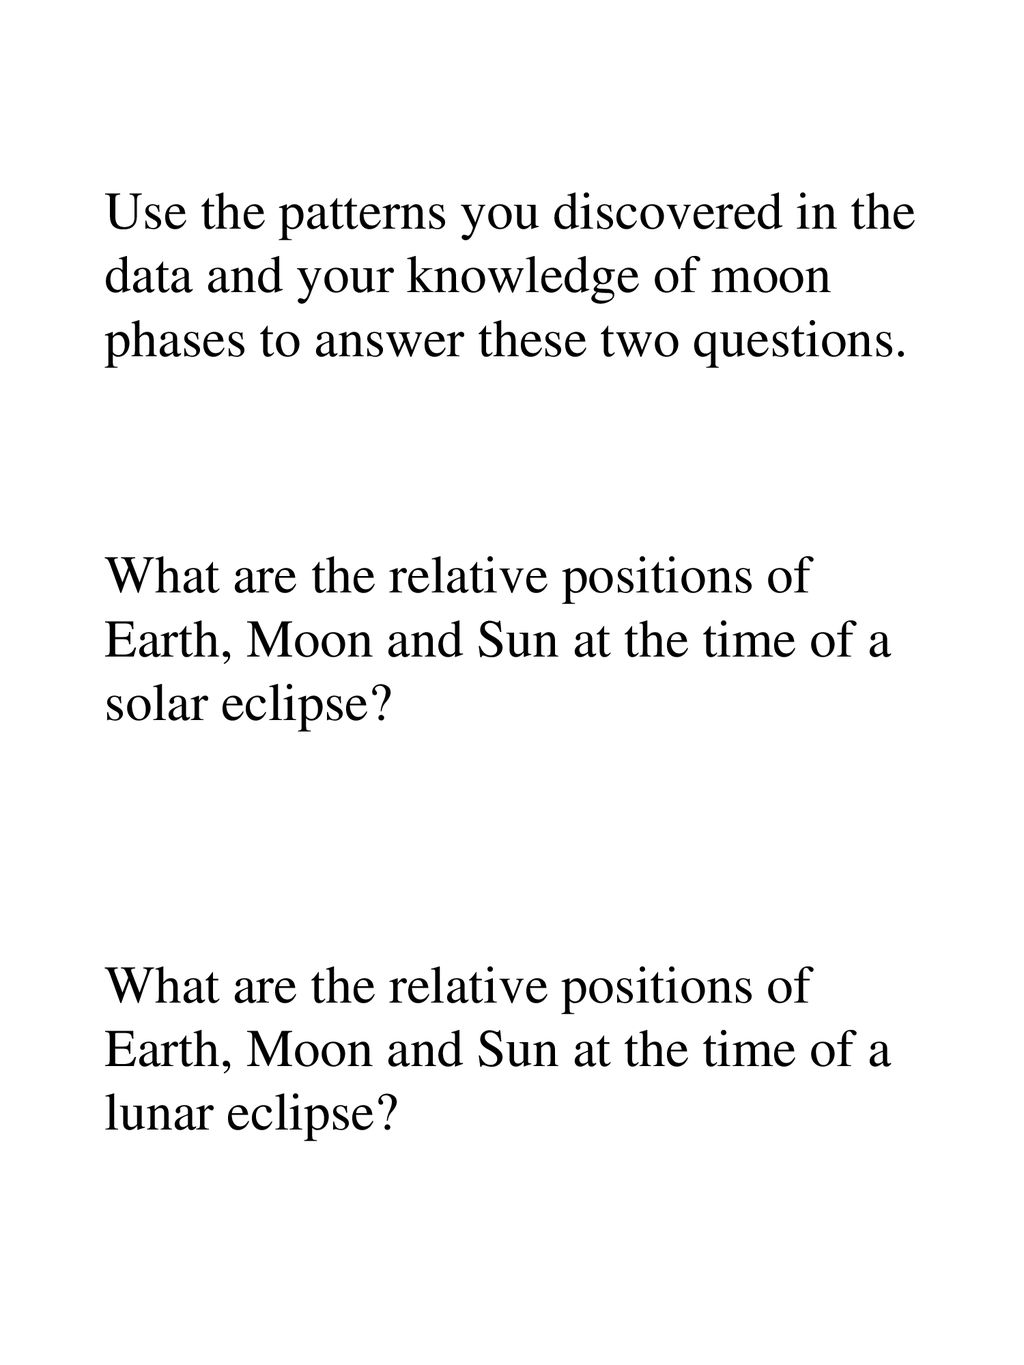 Use the patterns you discovered in the data and your knowledge of moon phases to answer these two questions.